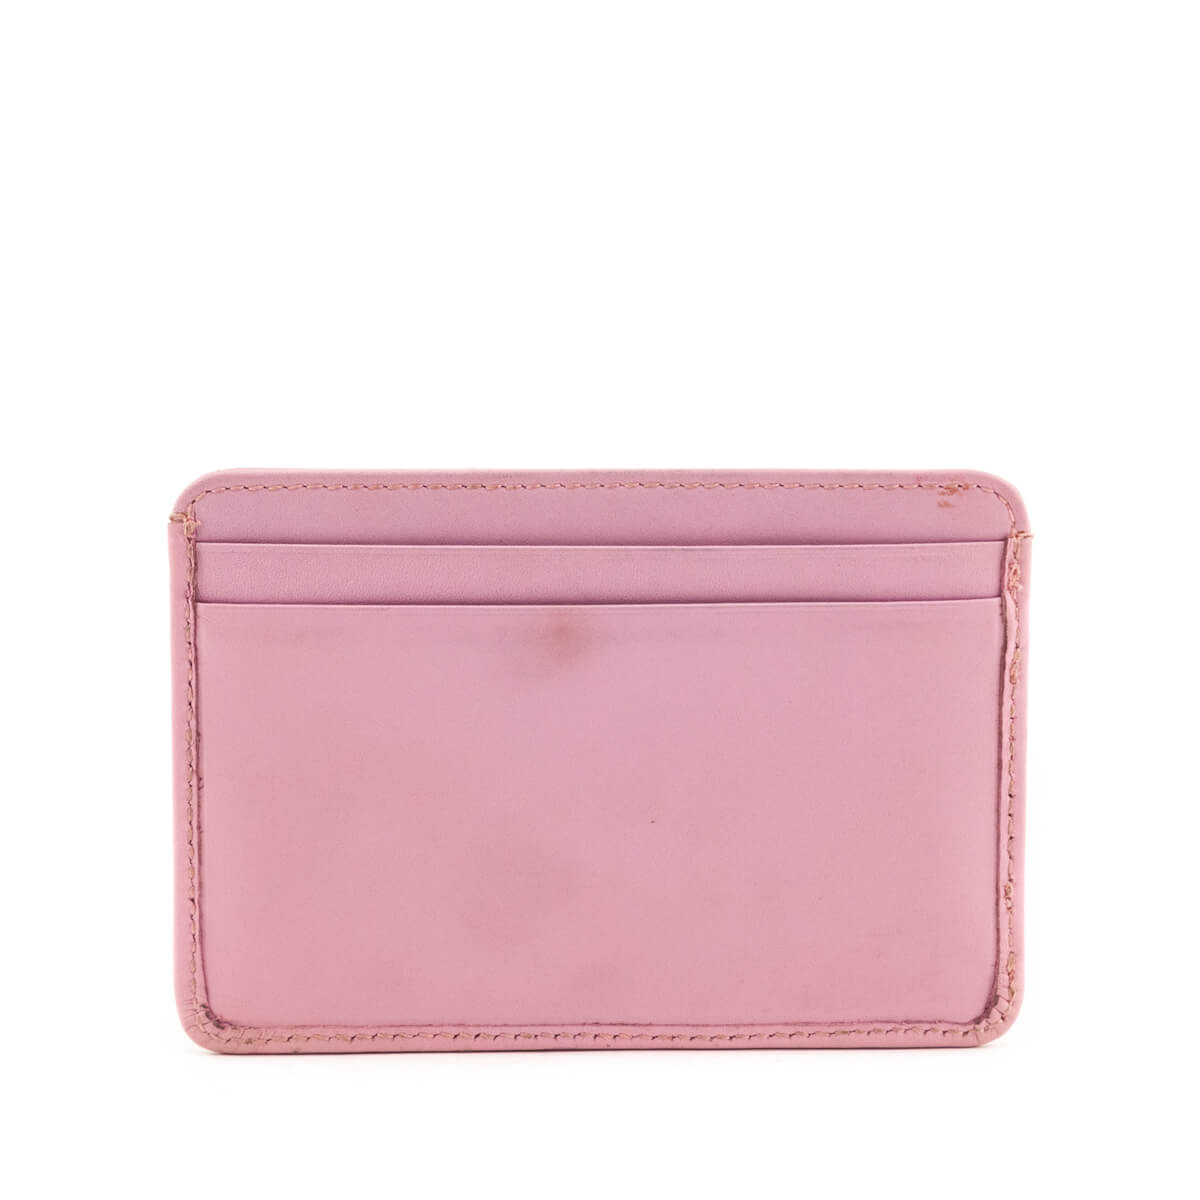 Chanel Pink Leather Ligne Cambon Cardholder - Love that Bag etc - Preowned Authentic Designer Handbags & Preloved Fashions